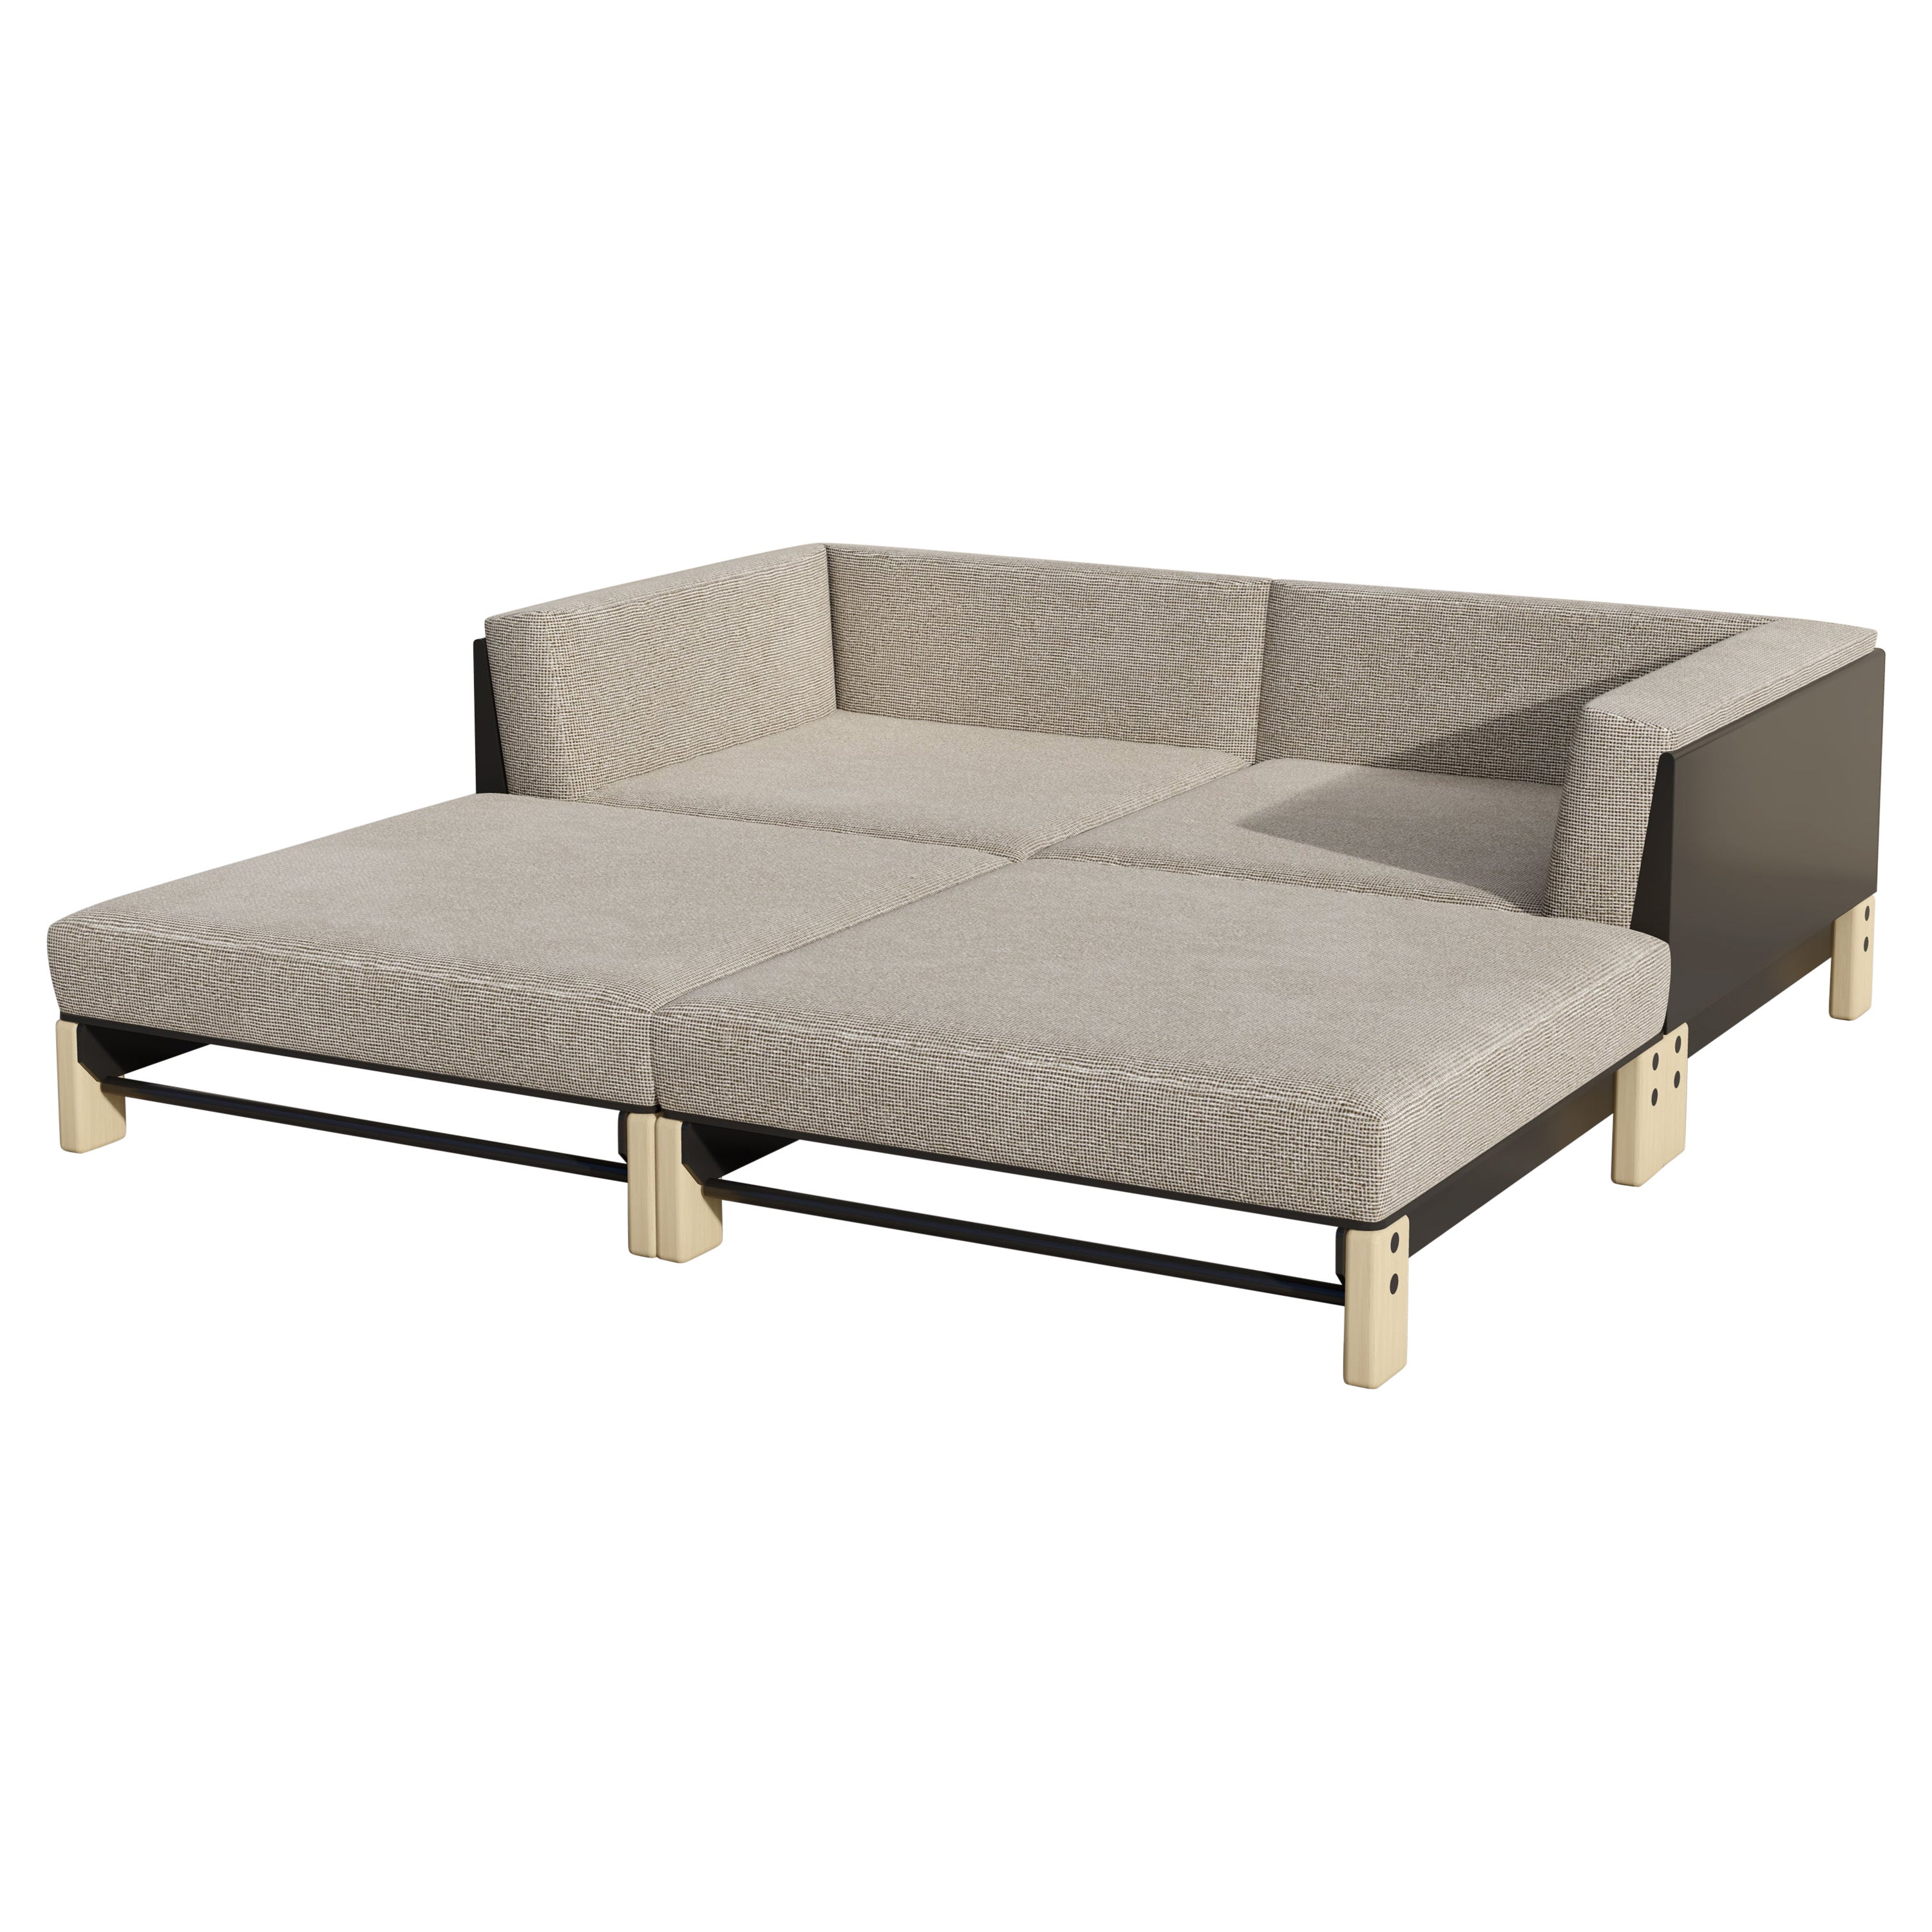 Outdoor Lounge Sectional 0:1, Chaise Day Bed